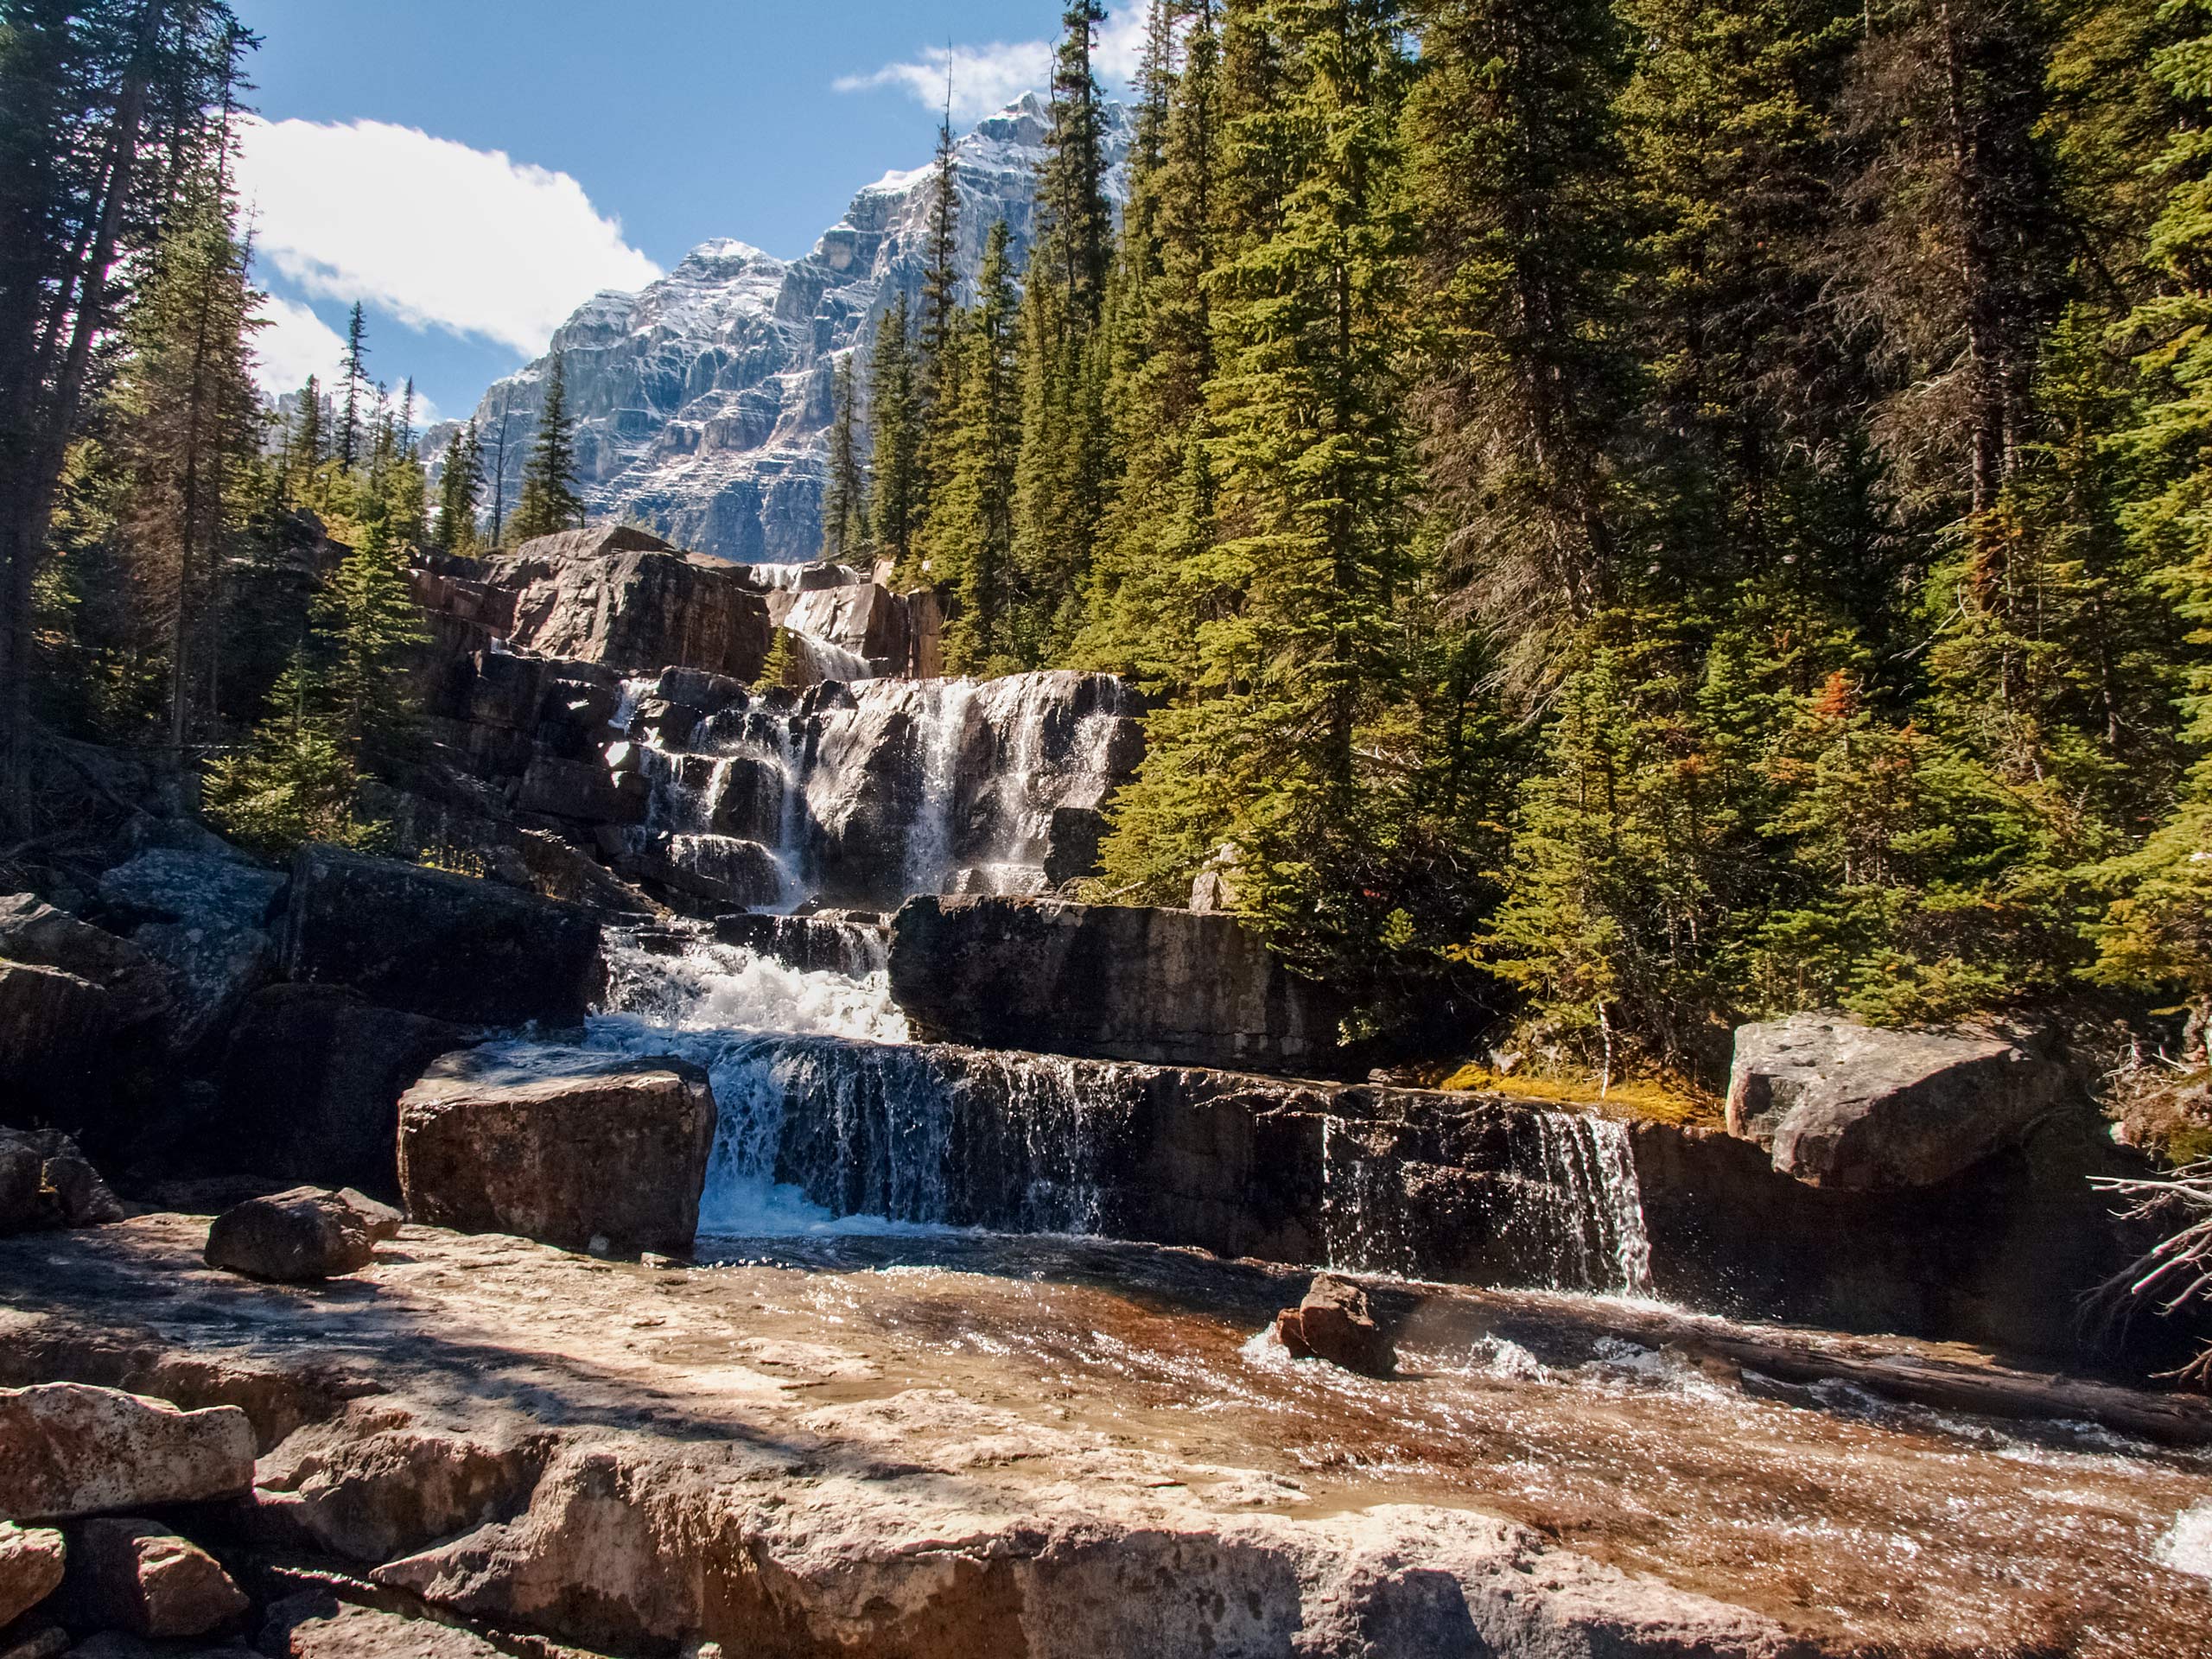 Natural stone block waterfalls hiden in the forest of the rocky moutains Banff National Park